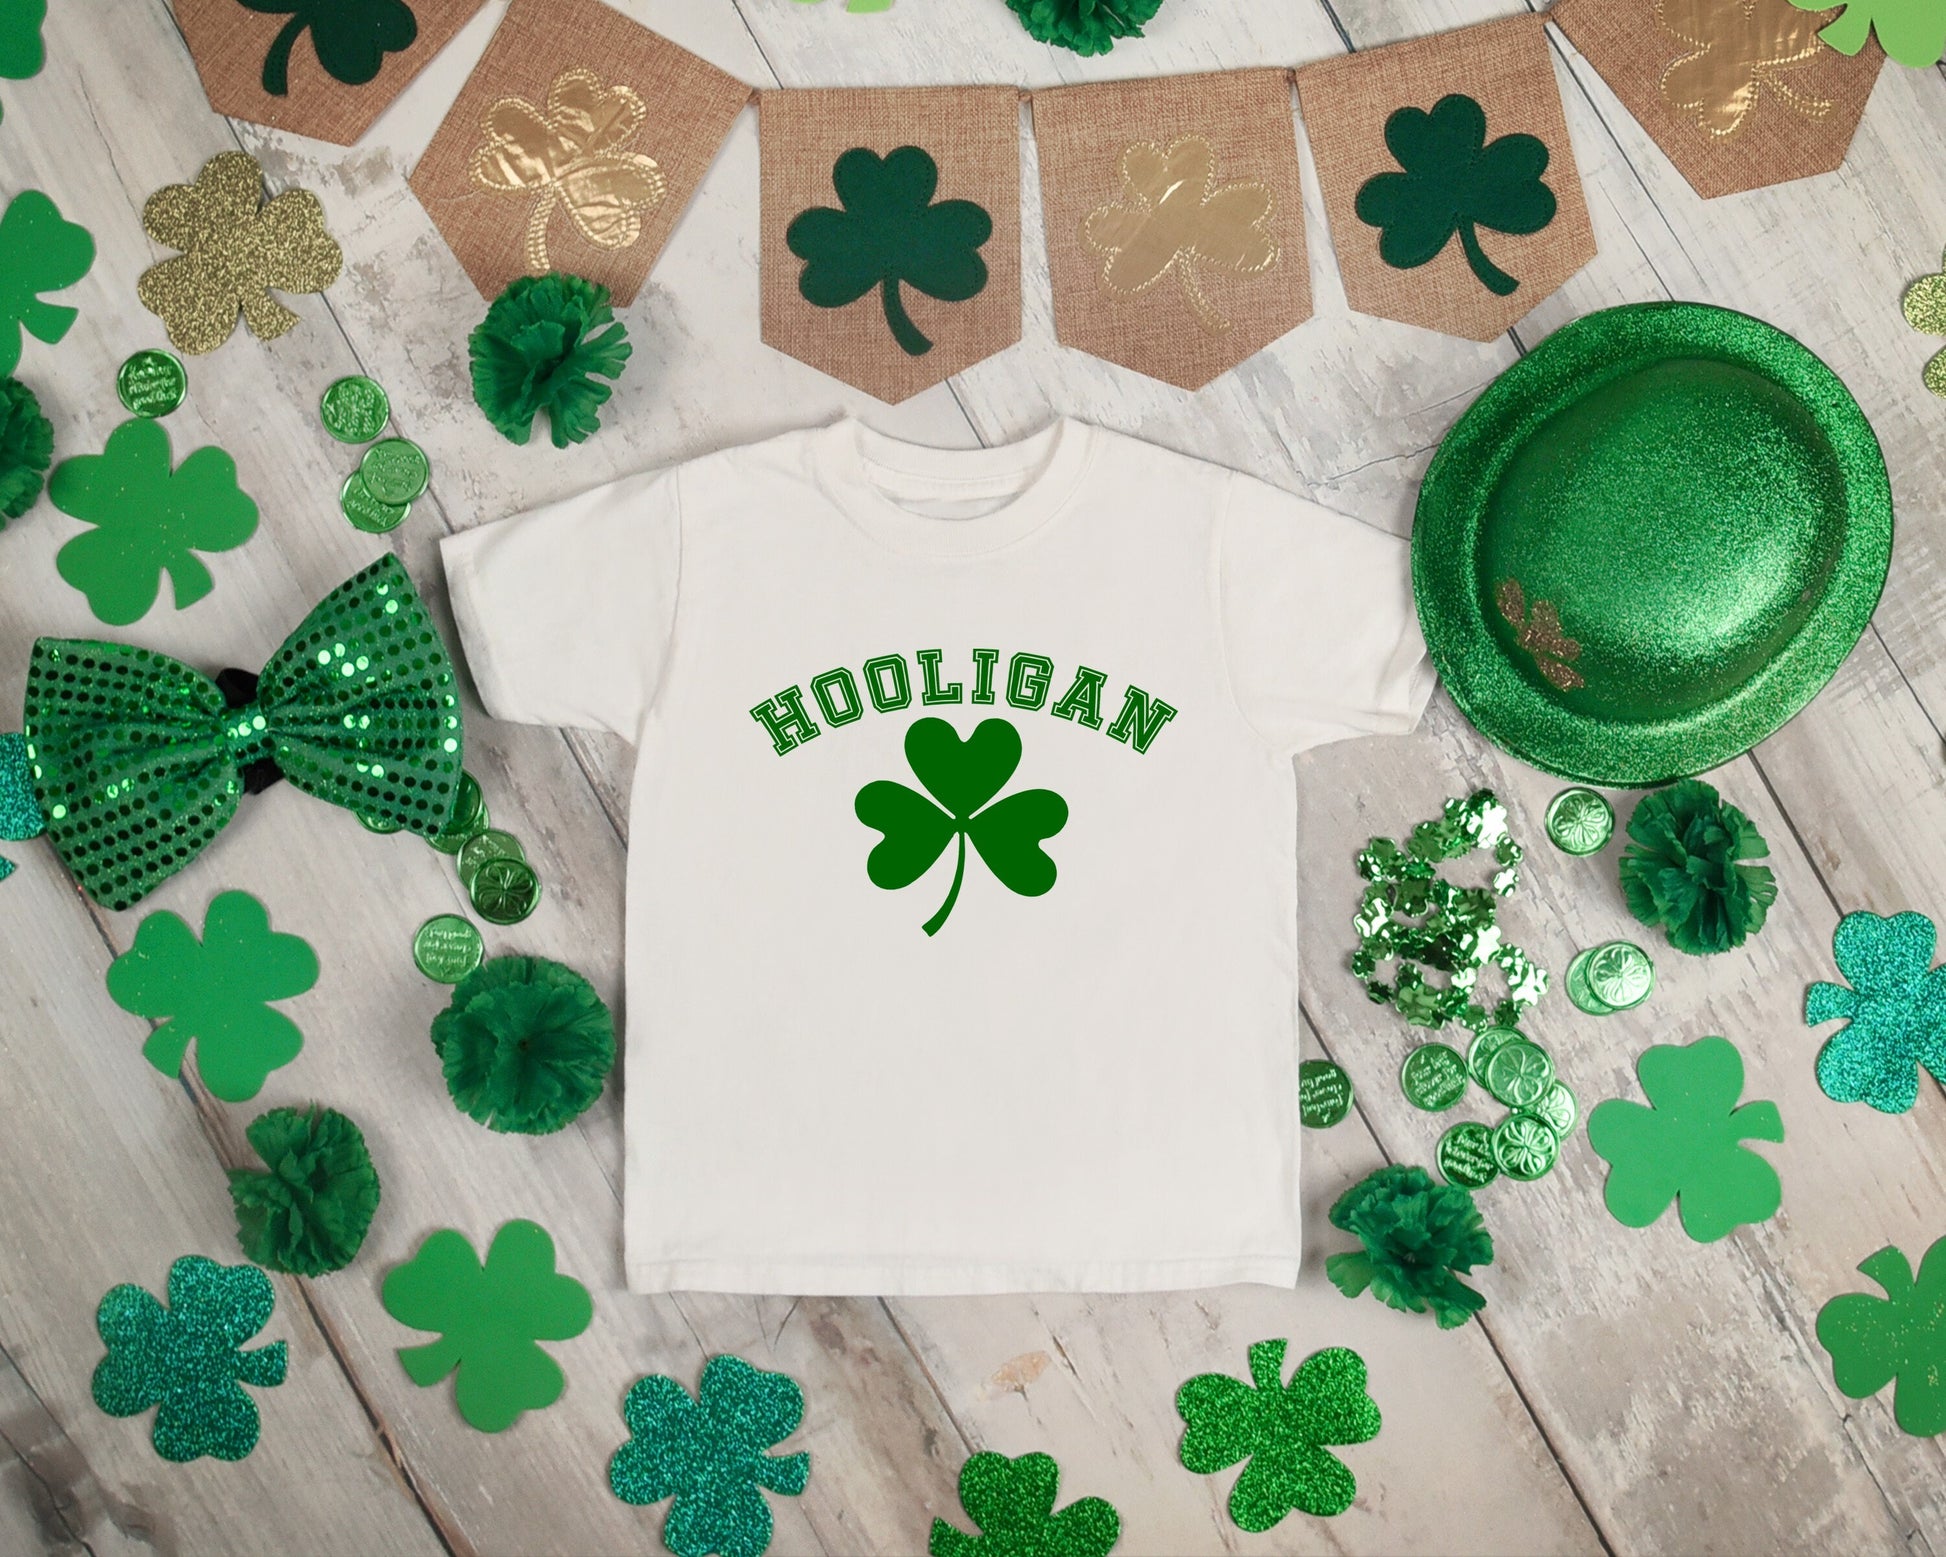 Hooligan St Patty's Toddler or Youth Shirt - st pattys day boy shirt - twin boys shirts - boys st patrick's day shirts